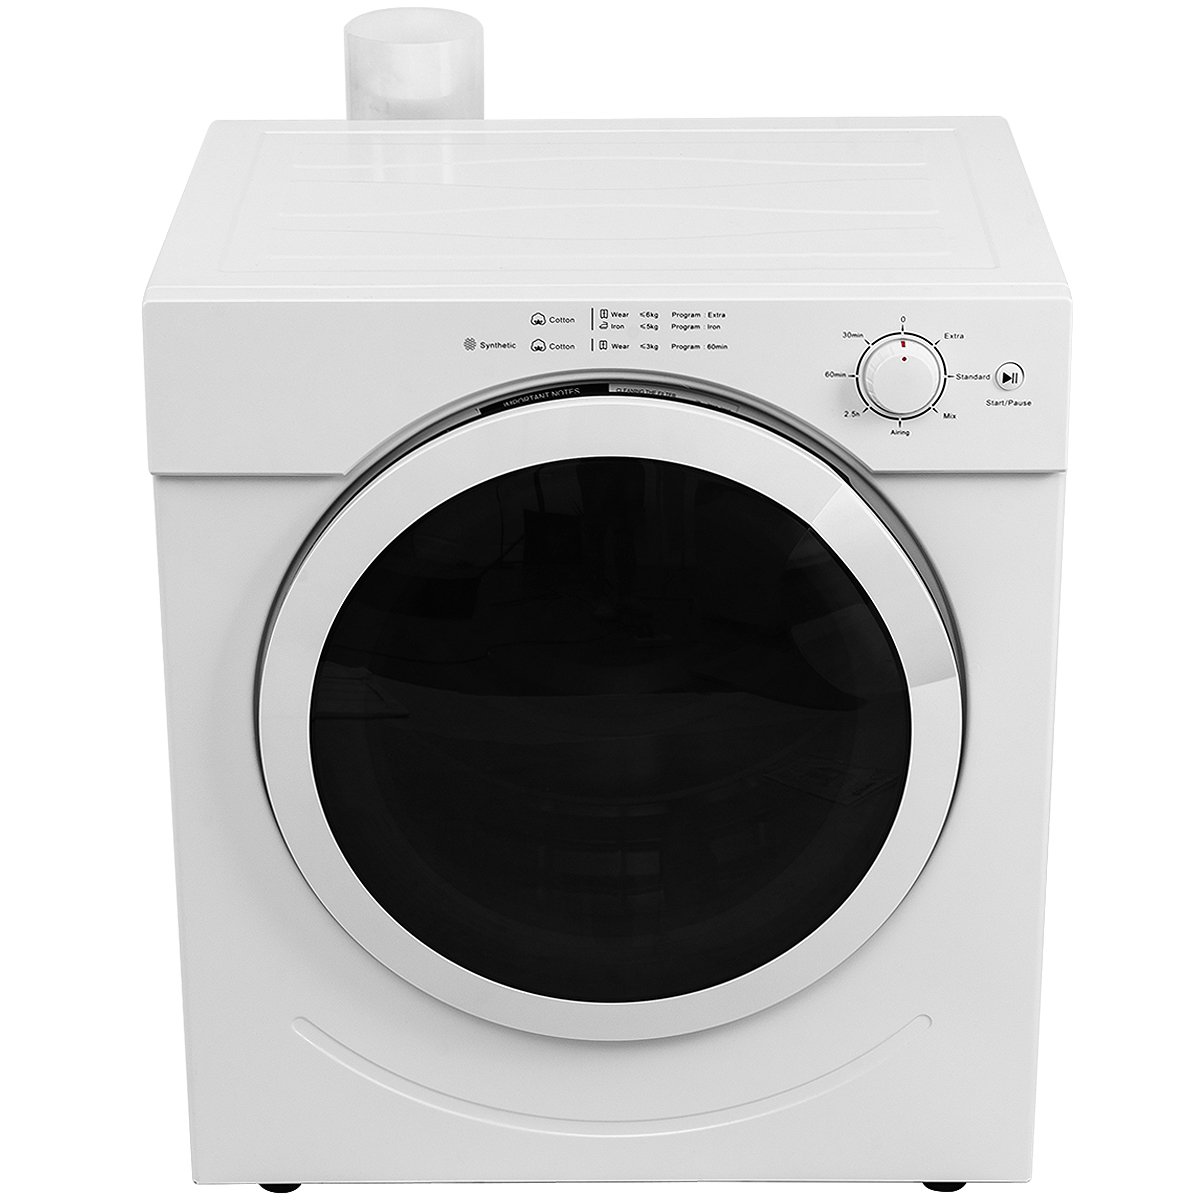 Costway Electric Tumble Dryer Compact Stainless Steel Clothes Dryer (3.21 Cu.Ft.)